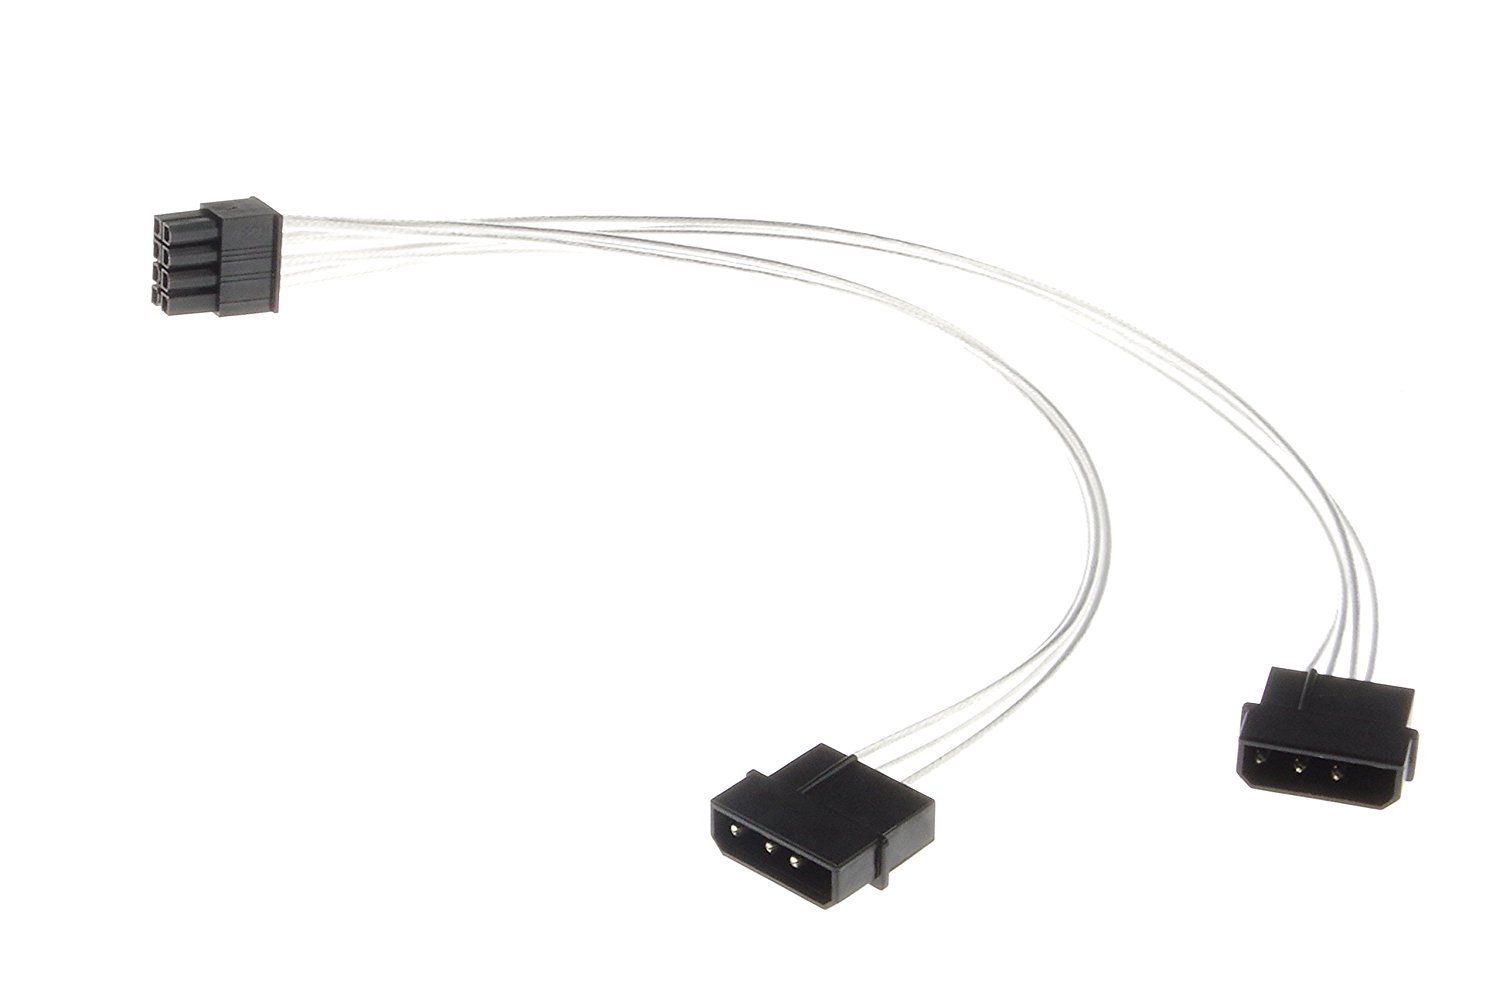 8-PIN PCIE TO 2X MOLEX POWER CABLE